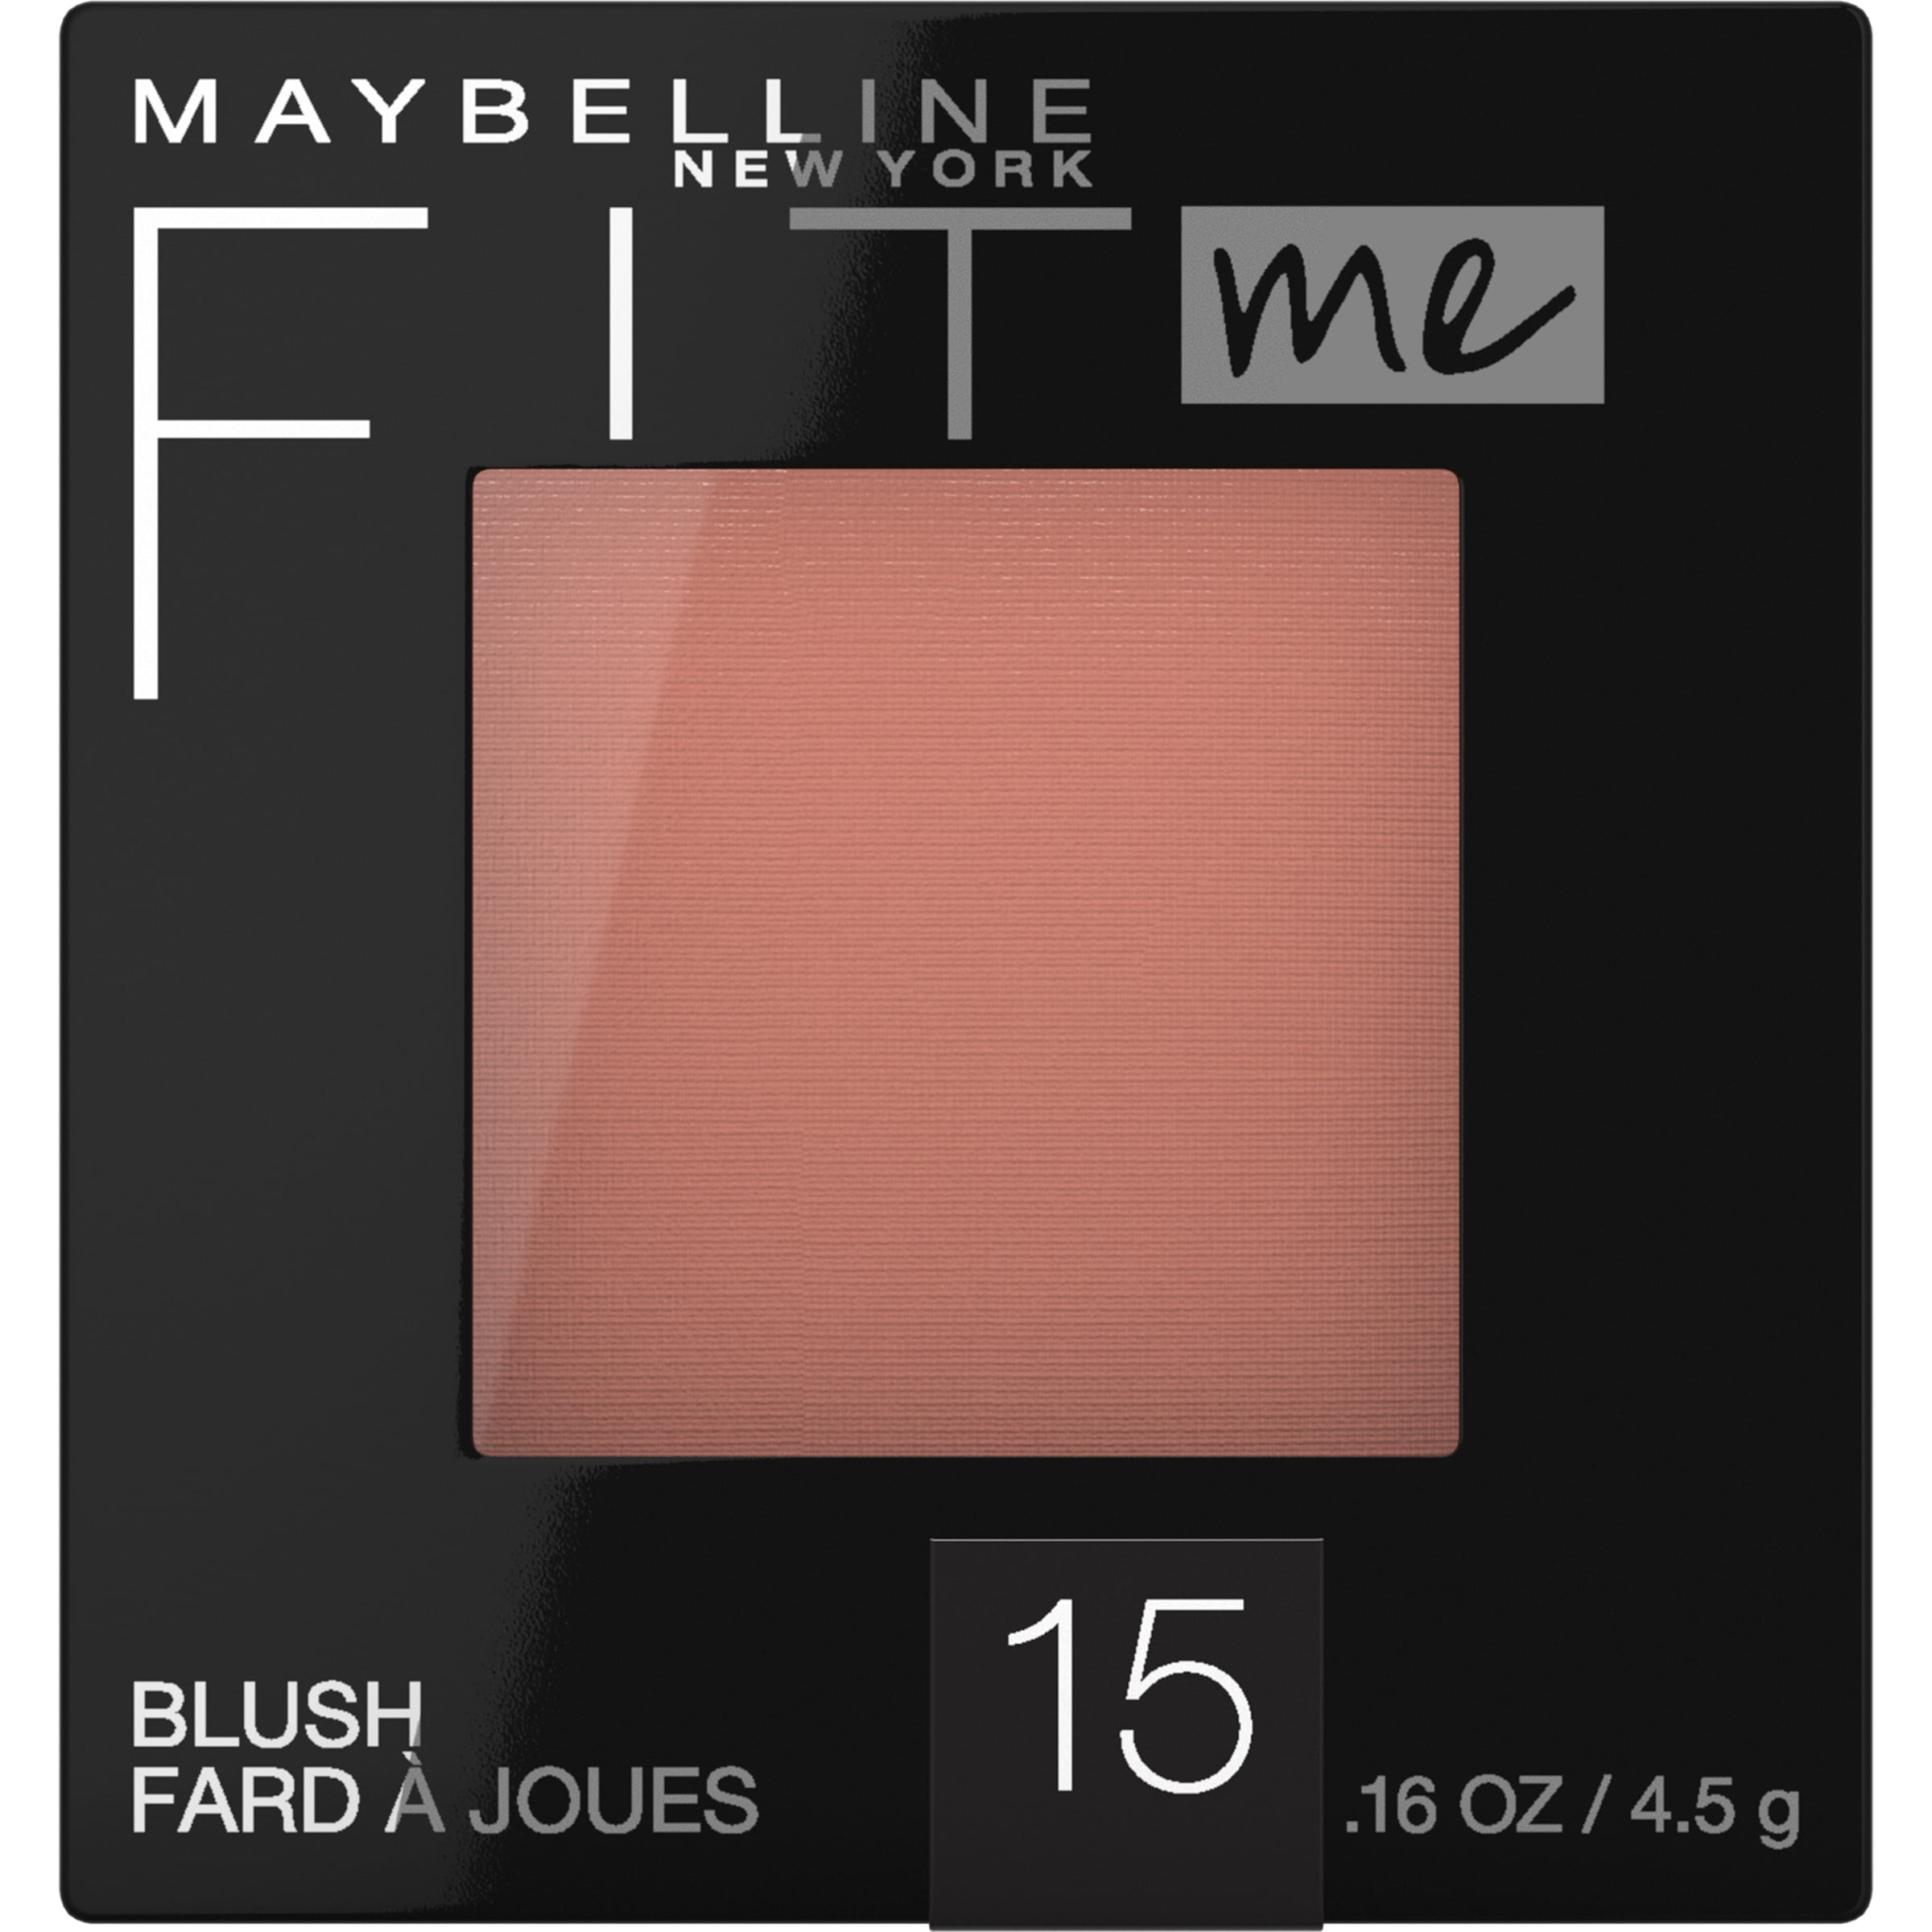 Maybelline Fit Me Blush, Nude, 0.16 oz